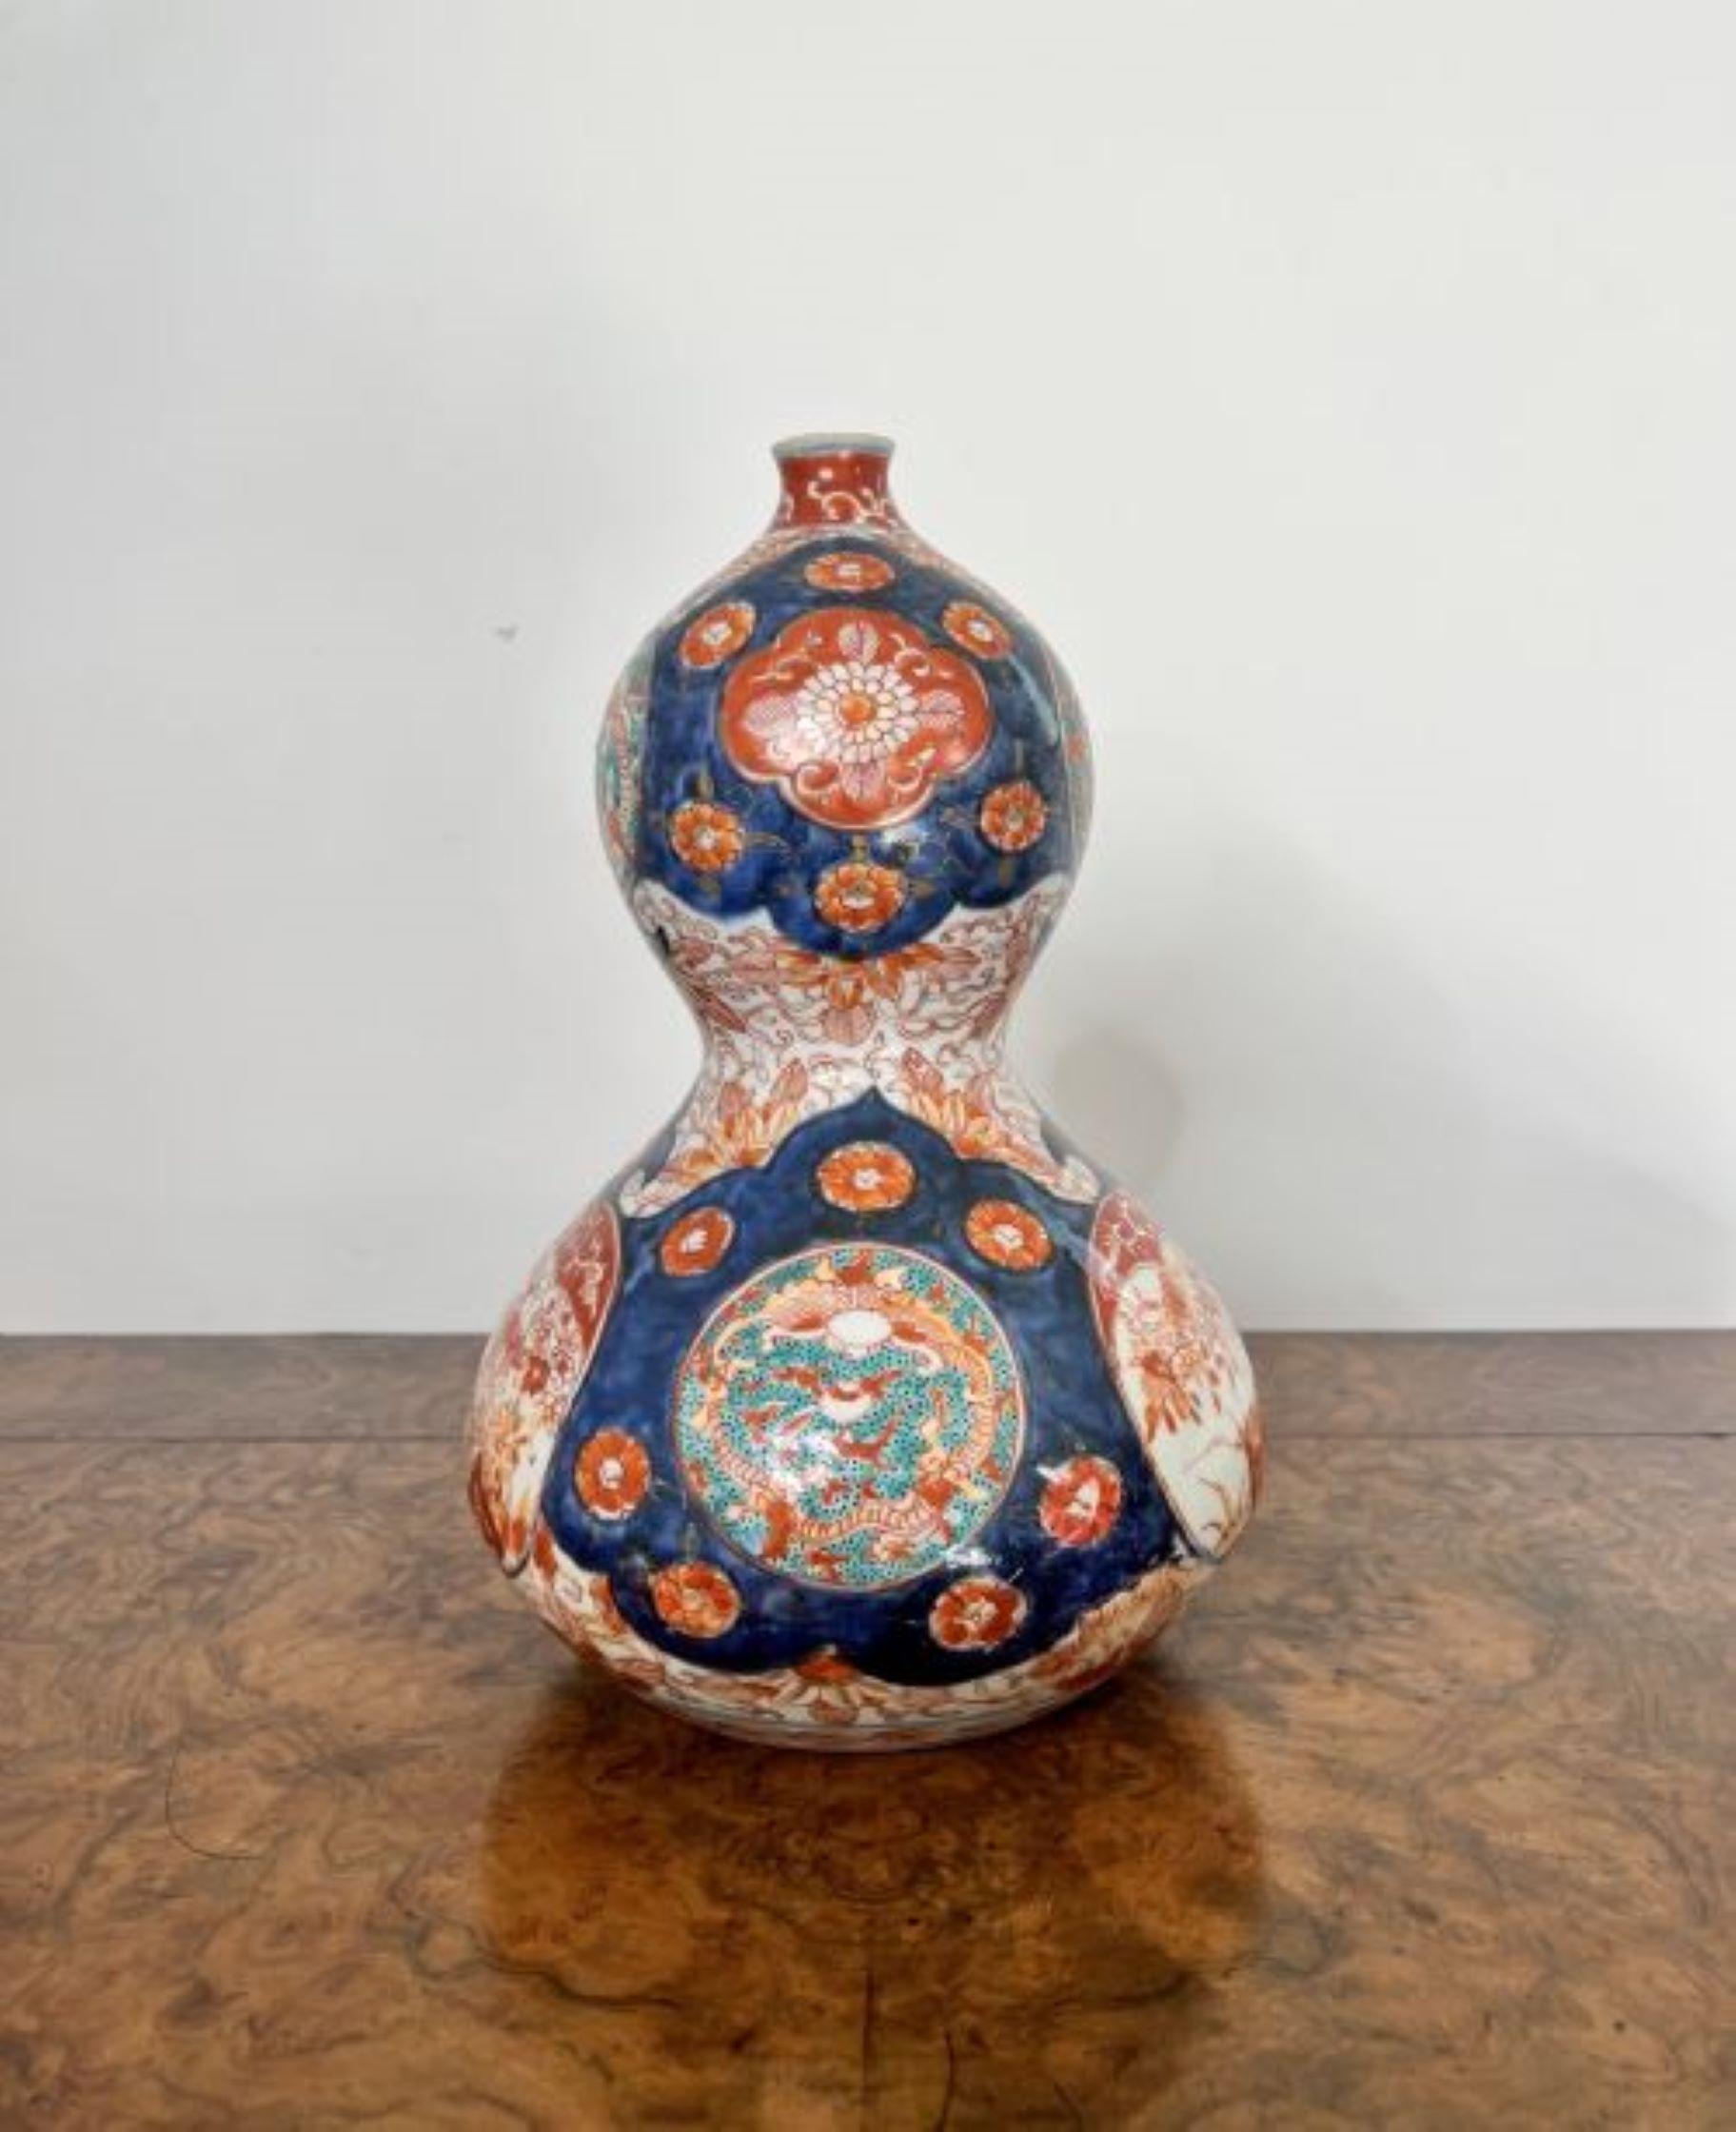 Magnificent pair of unusual shaped antique Japanese imari vases having a quality pair of antique Japanese imari vases with an unusual bulbous shape, wonderful hand painted panels with flowers, trees, scrolls and patterns in fantastic red, blue,